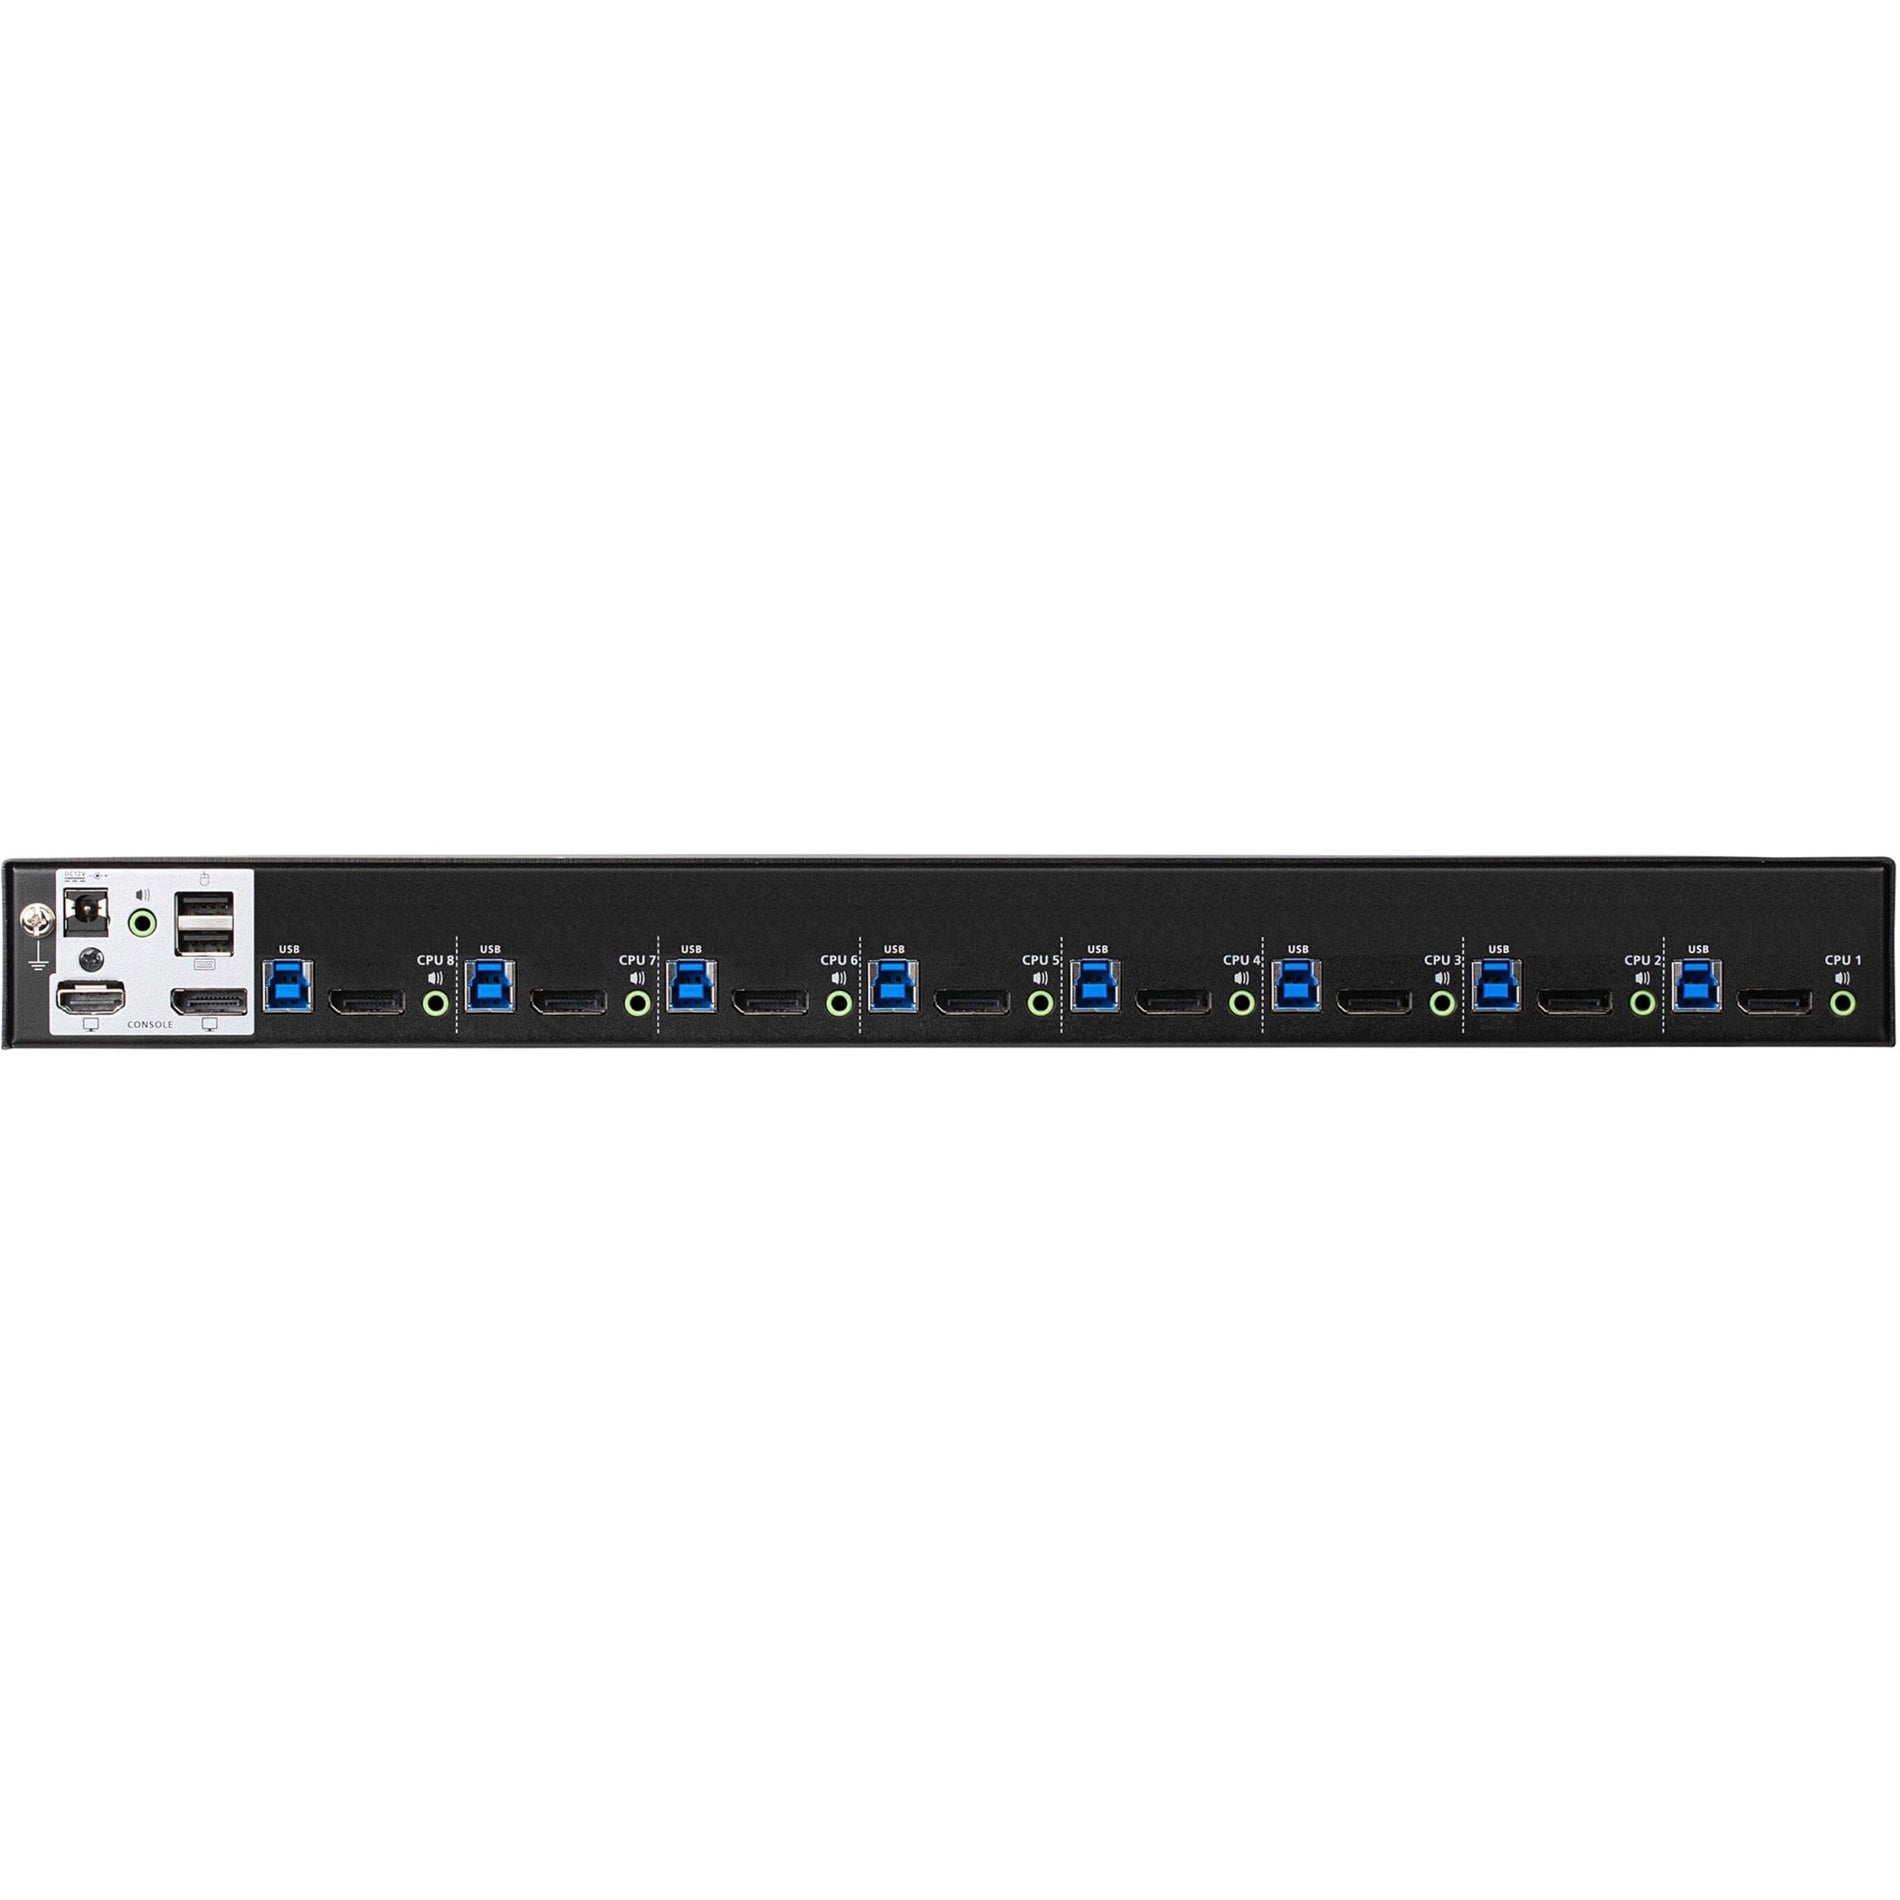 ATEN CS19208 8-Port USB 3.0 4K DisplayPort KVM Switch with Rack Mounting Kit, High-Performance Control for Multiple Computers